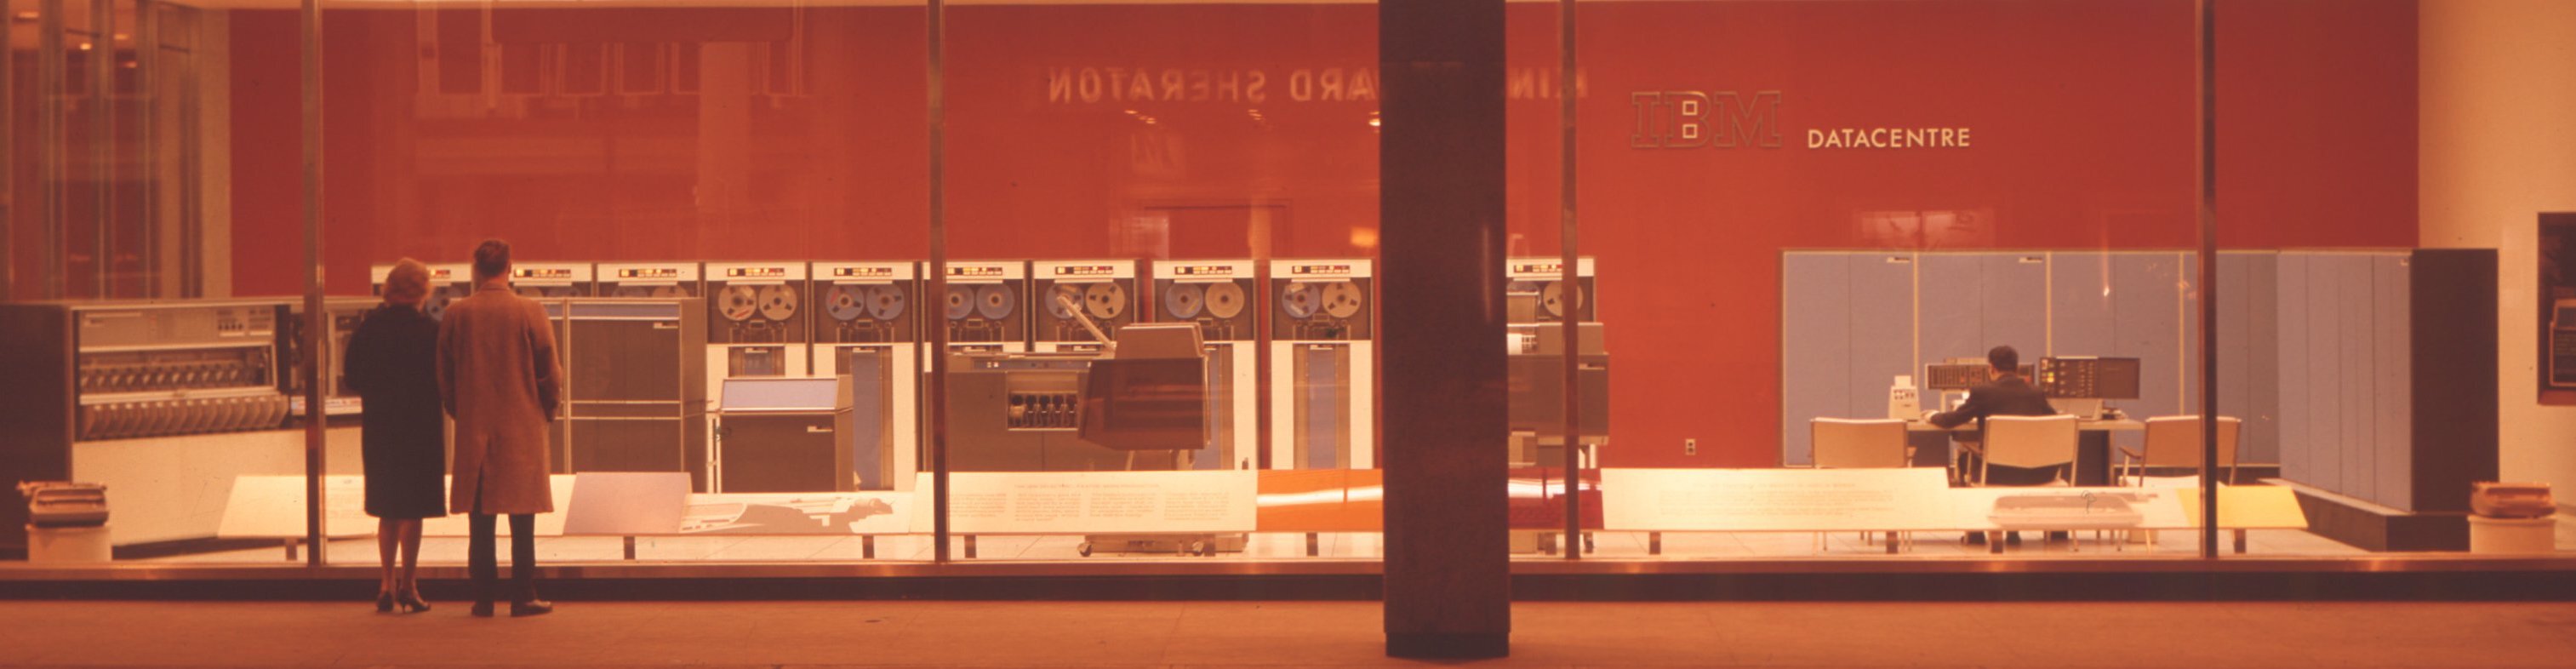 Photogram of an IBM store front, Tronto, 1963